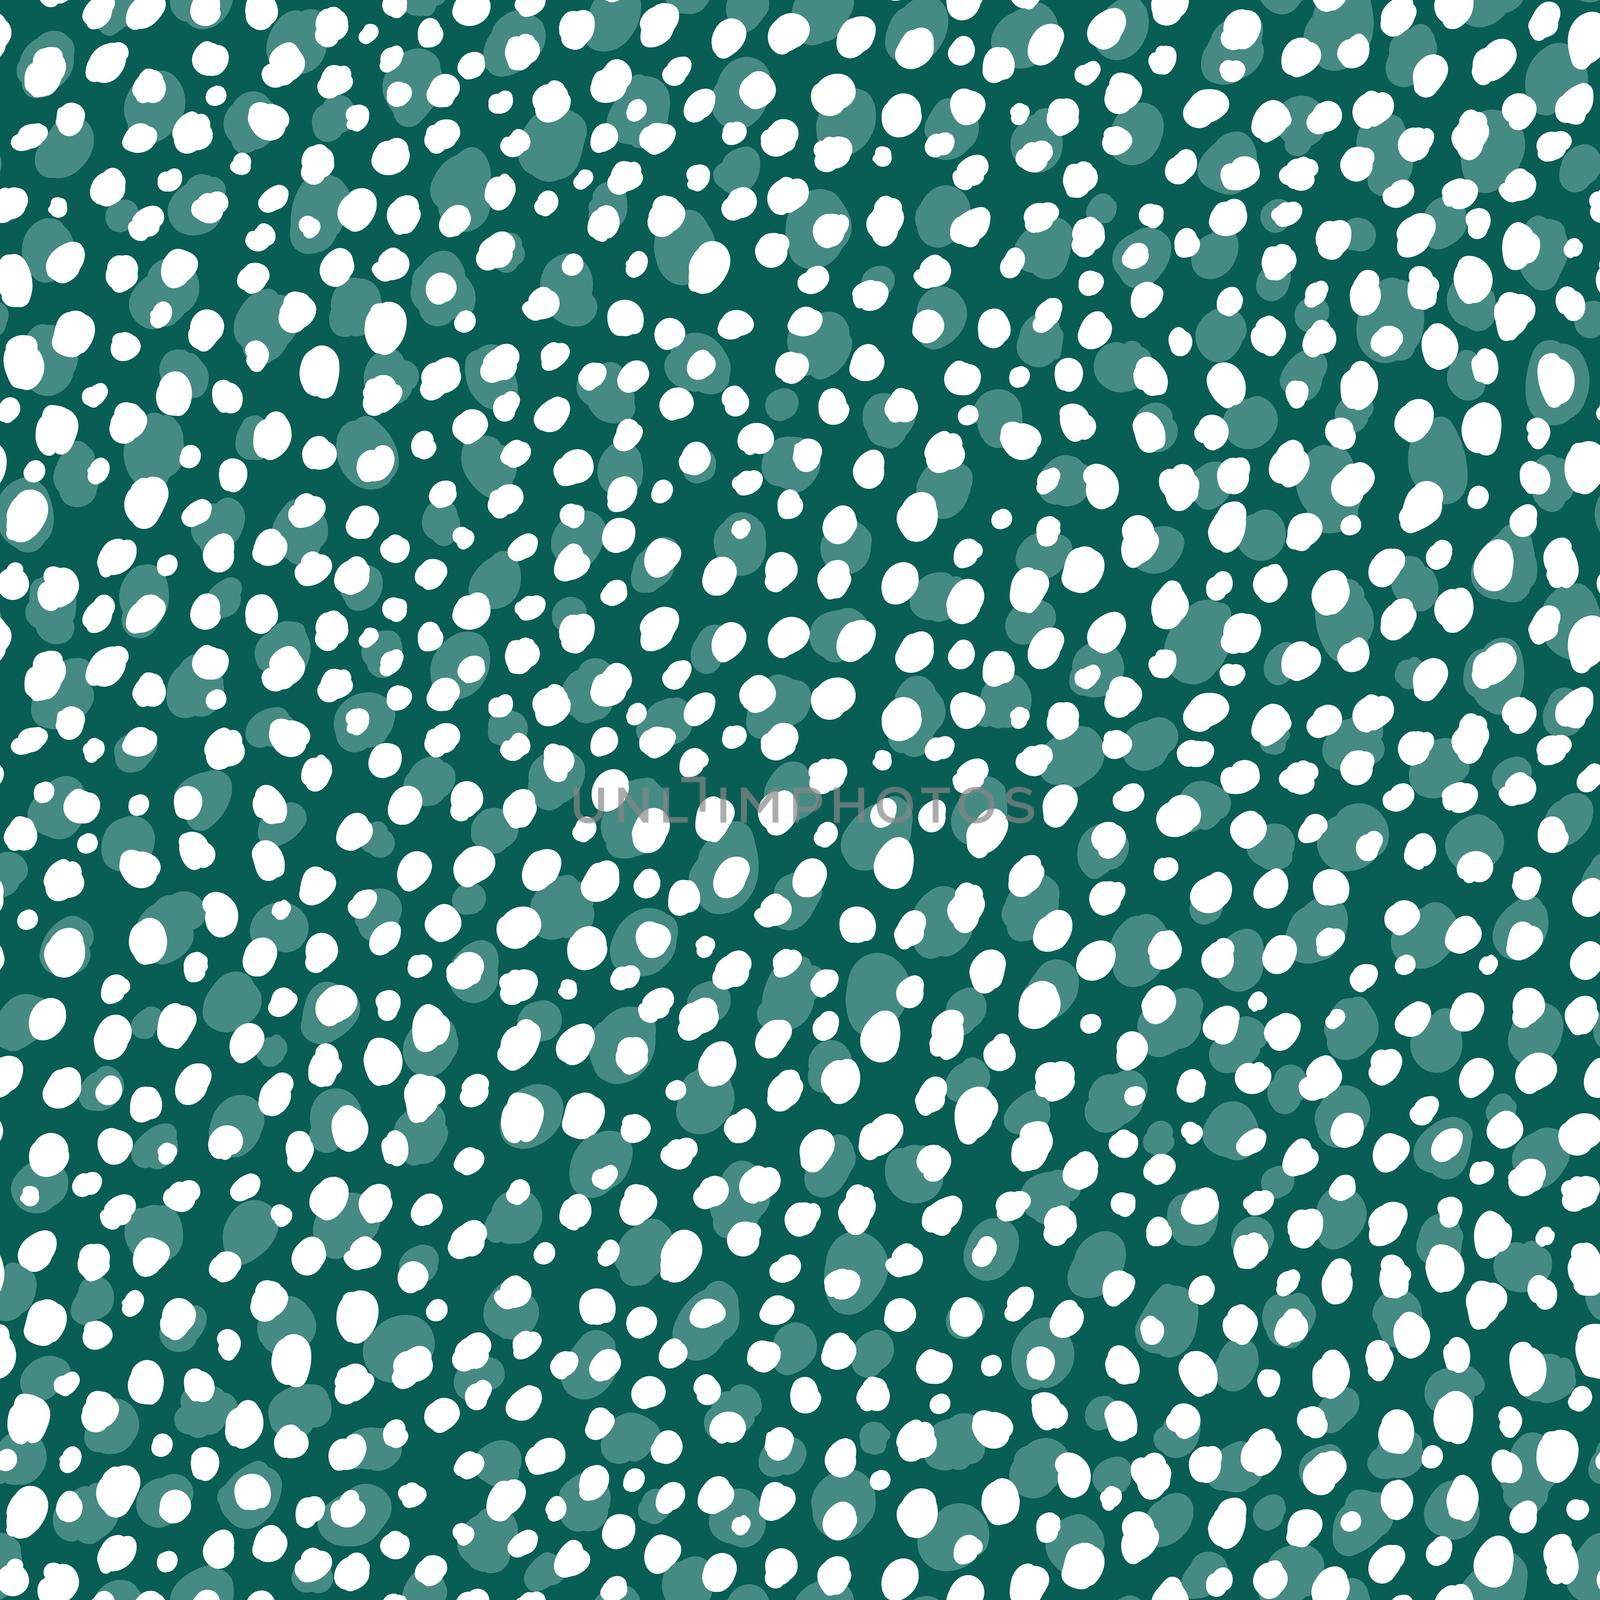 Abstract modern leopard seamless pattern. Animals trendy background. Green and white decorative vector stock illustration for print, card, postcard, fabric, textile. Modern ornament of stylized skin.